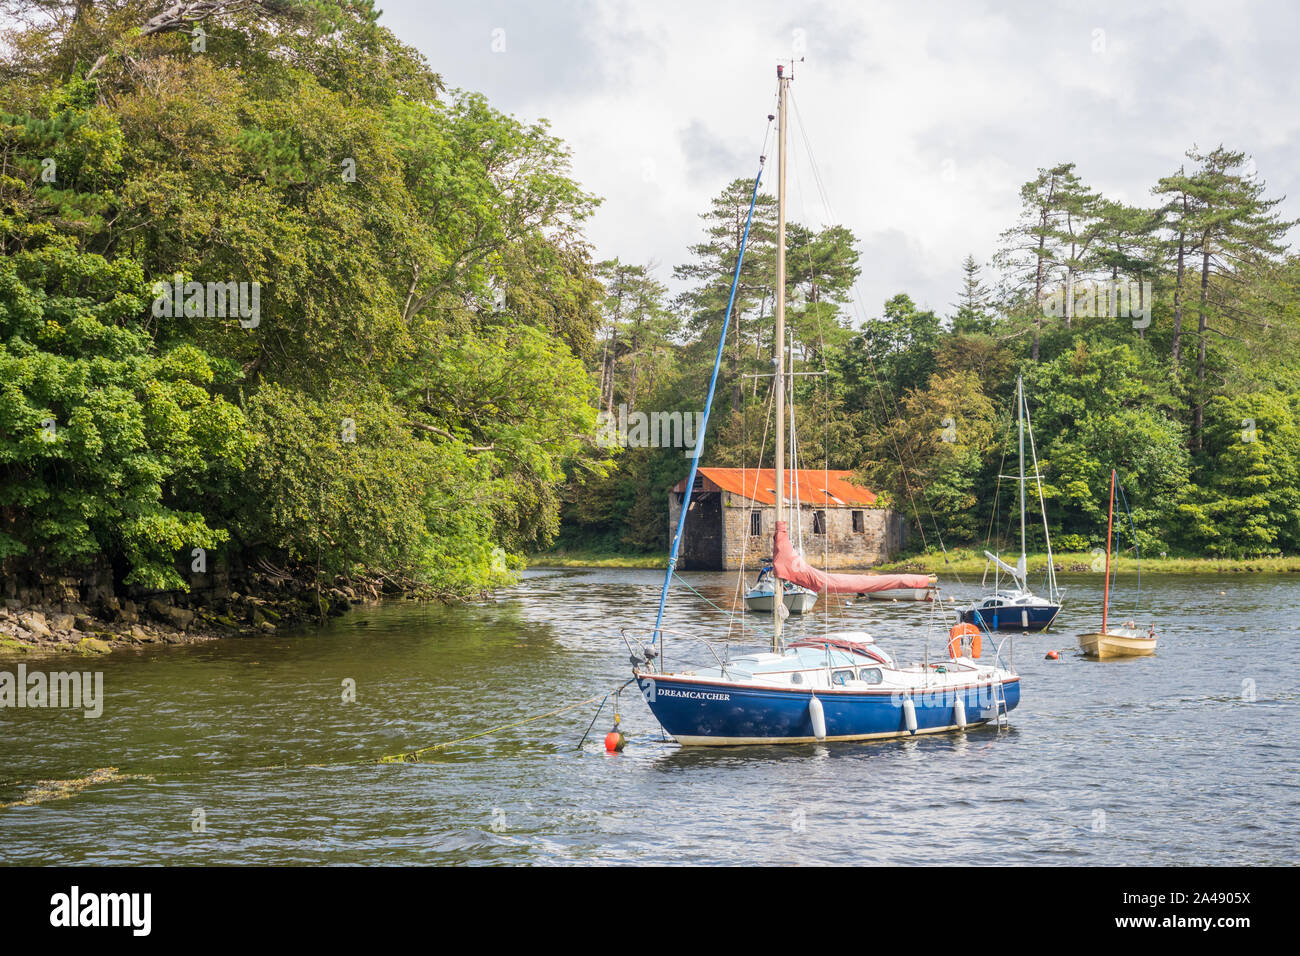 WESTPORT, IRELAND - AUGUST 7, 2019: An old boathouse near the town of Westport in County Mayo in Ireland. Stock Photo